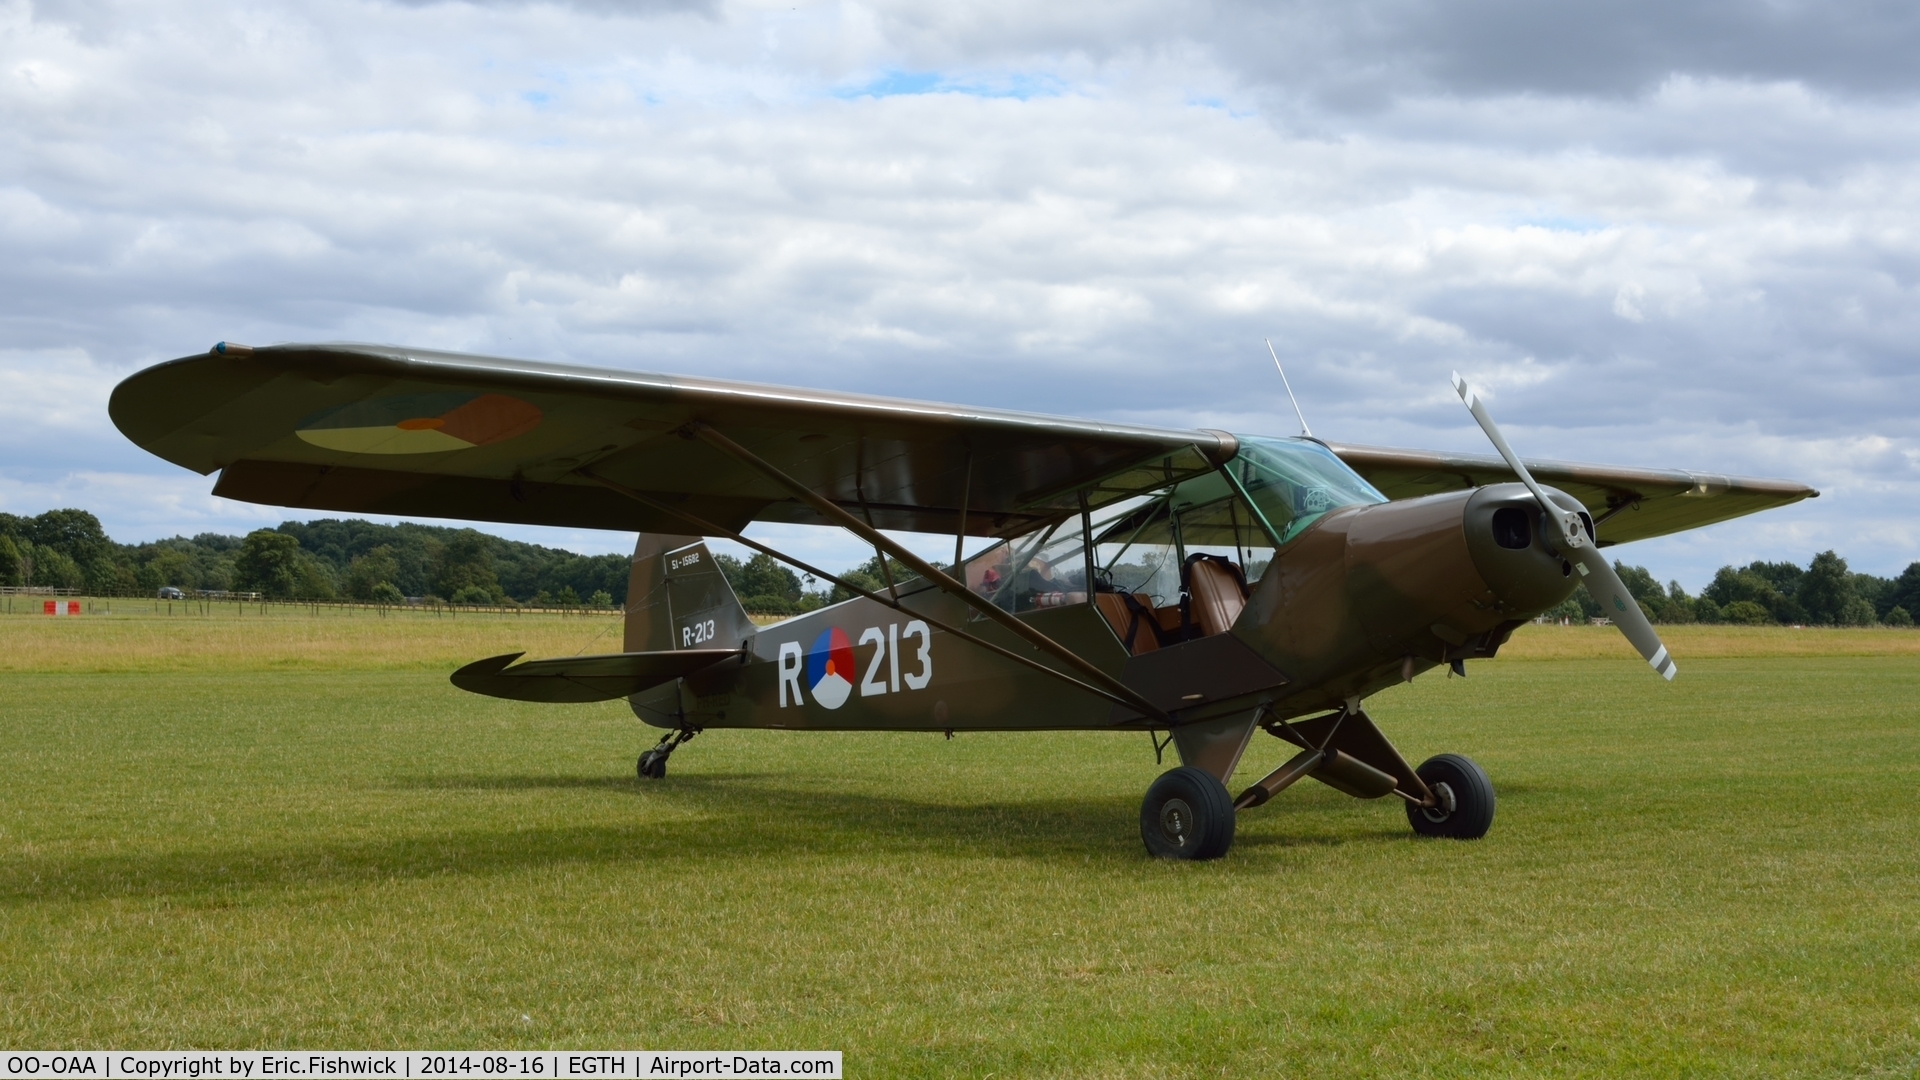 OO-OAA, 1950 Piper L-21A Super Cub (PA-18-125) C/N 18-568, 3. OO-OAA at The Shuttleworth Collection Flying Proms, Aug. 2014.